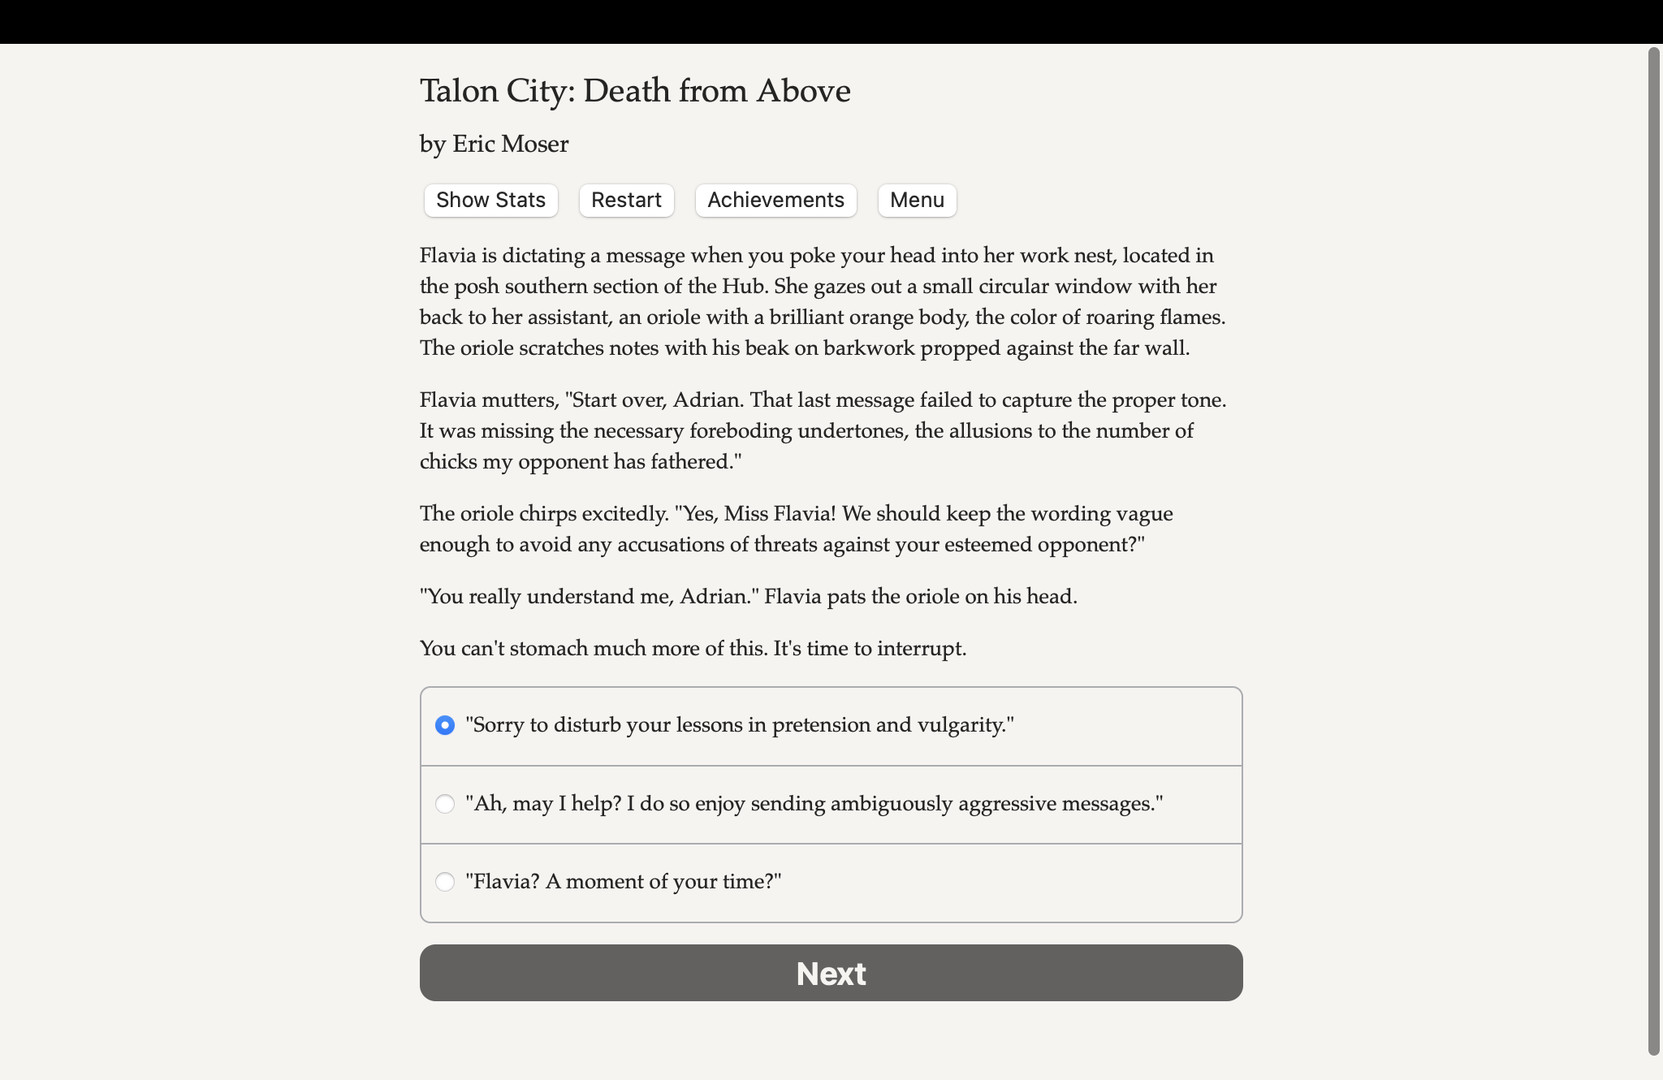 Talon City: Death from Above Free Download